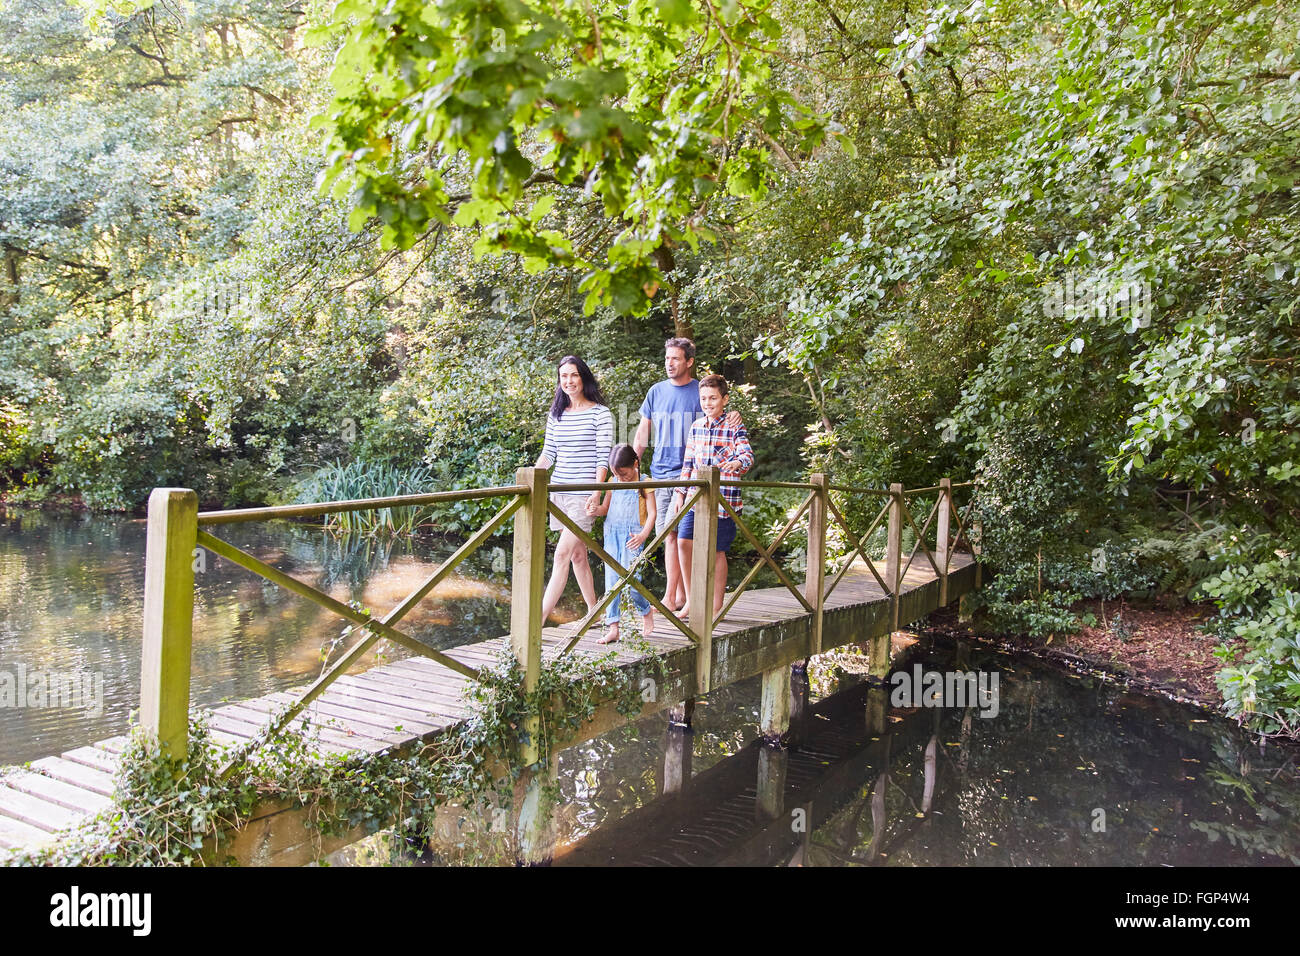 Family crossing footbridge in park with trees Stock Photo